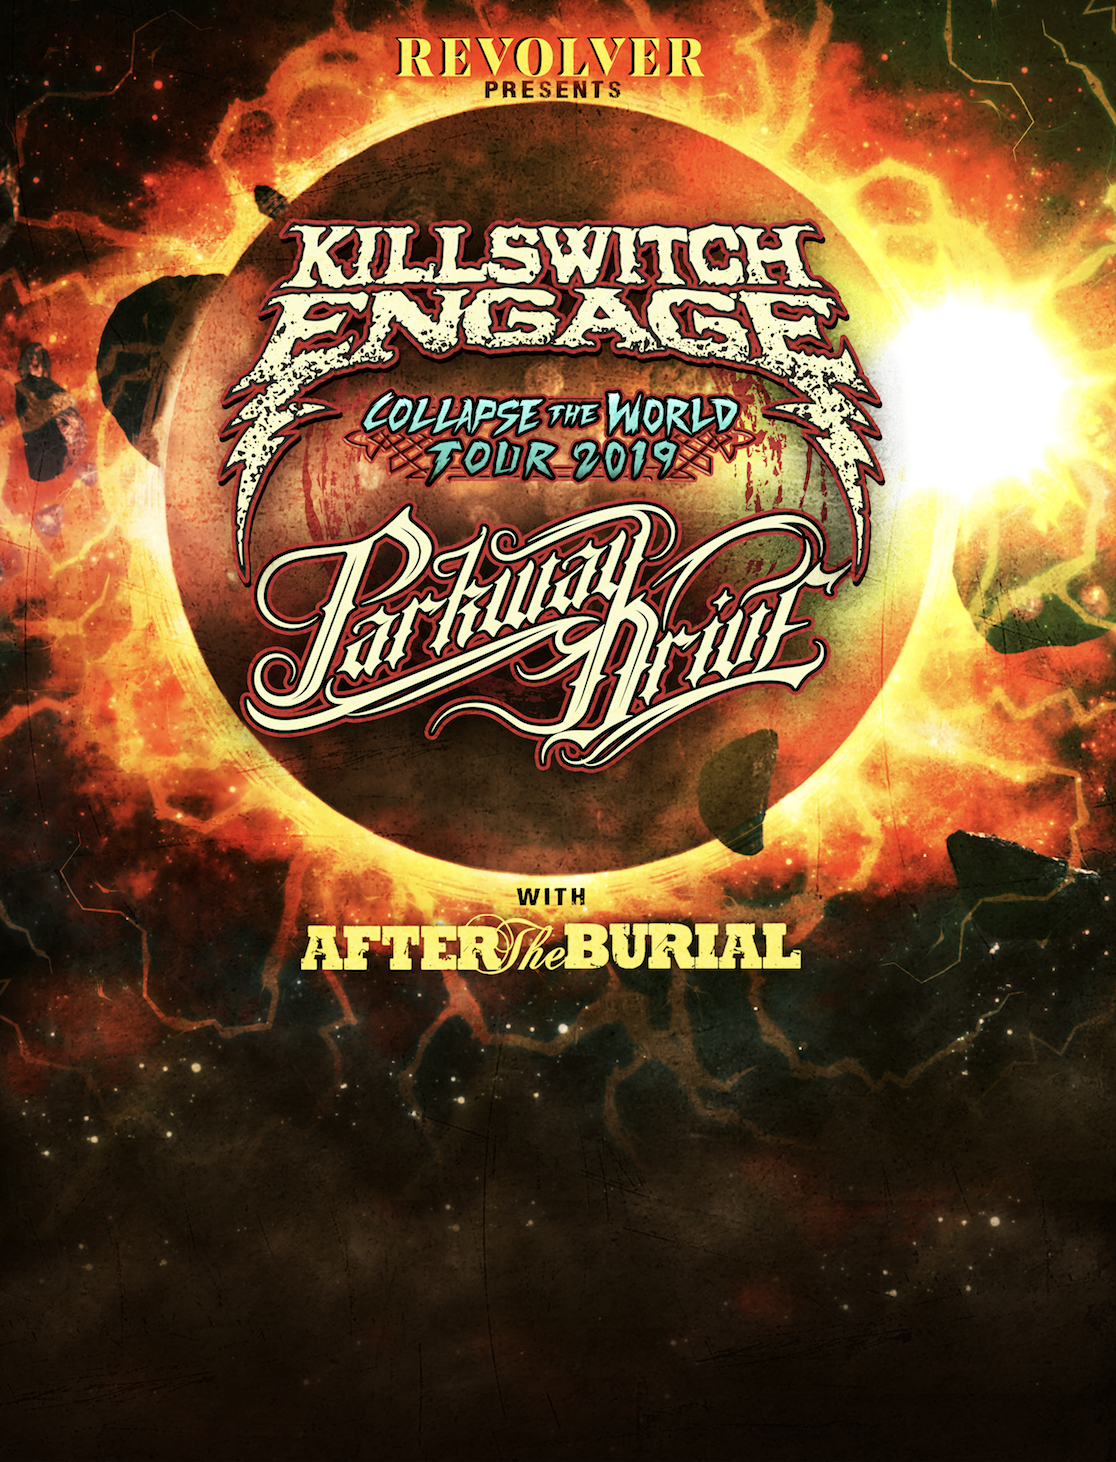 Killswitch Engage & Parkway Drive announce co-headlining ‘Collapse the World’ tour